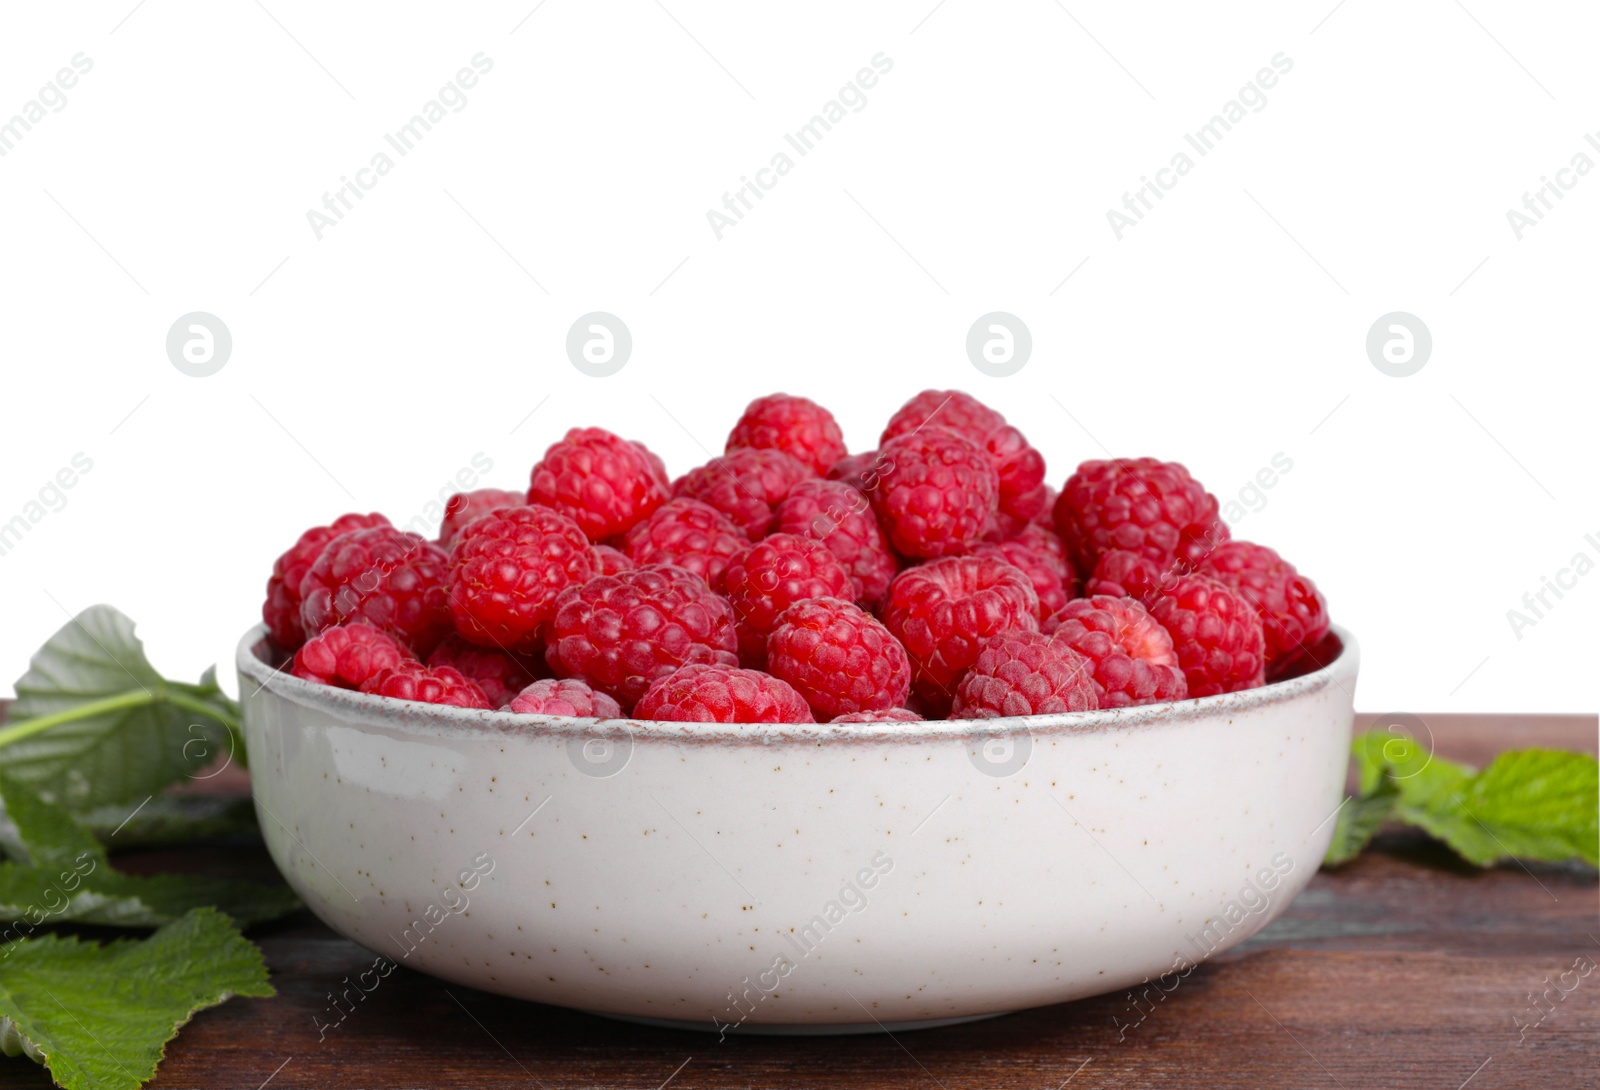 Photo of Bowl of fresh ripe raspberries with green leaves on wooden against white background